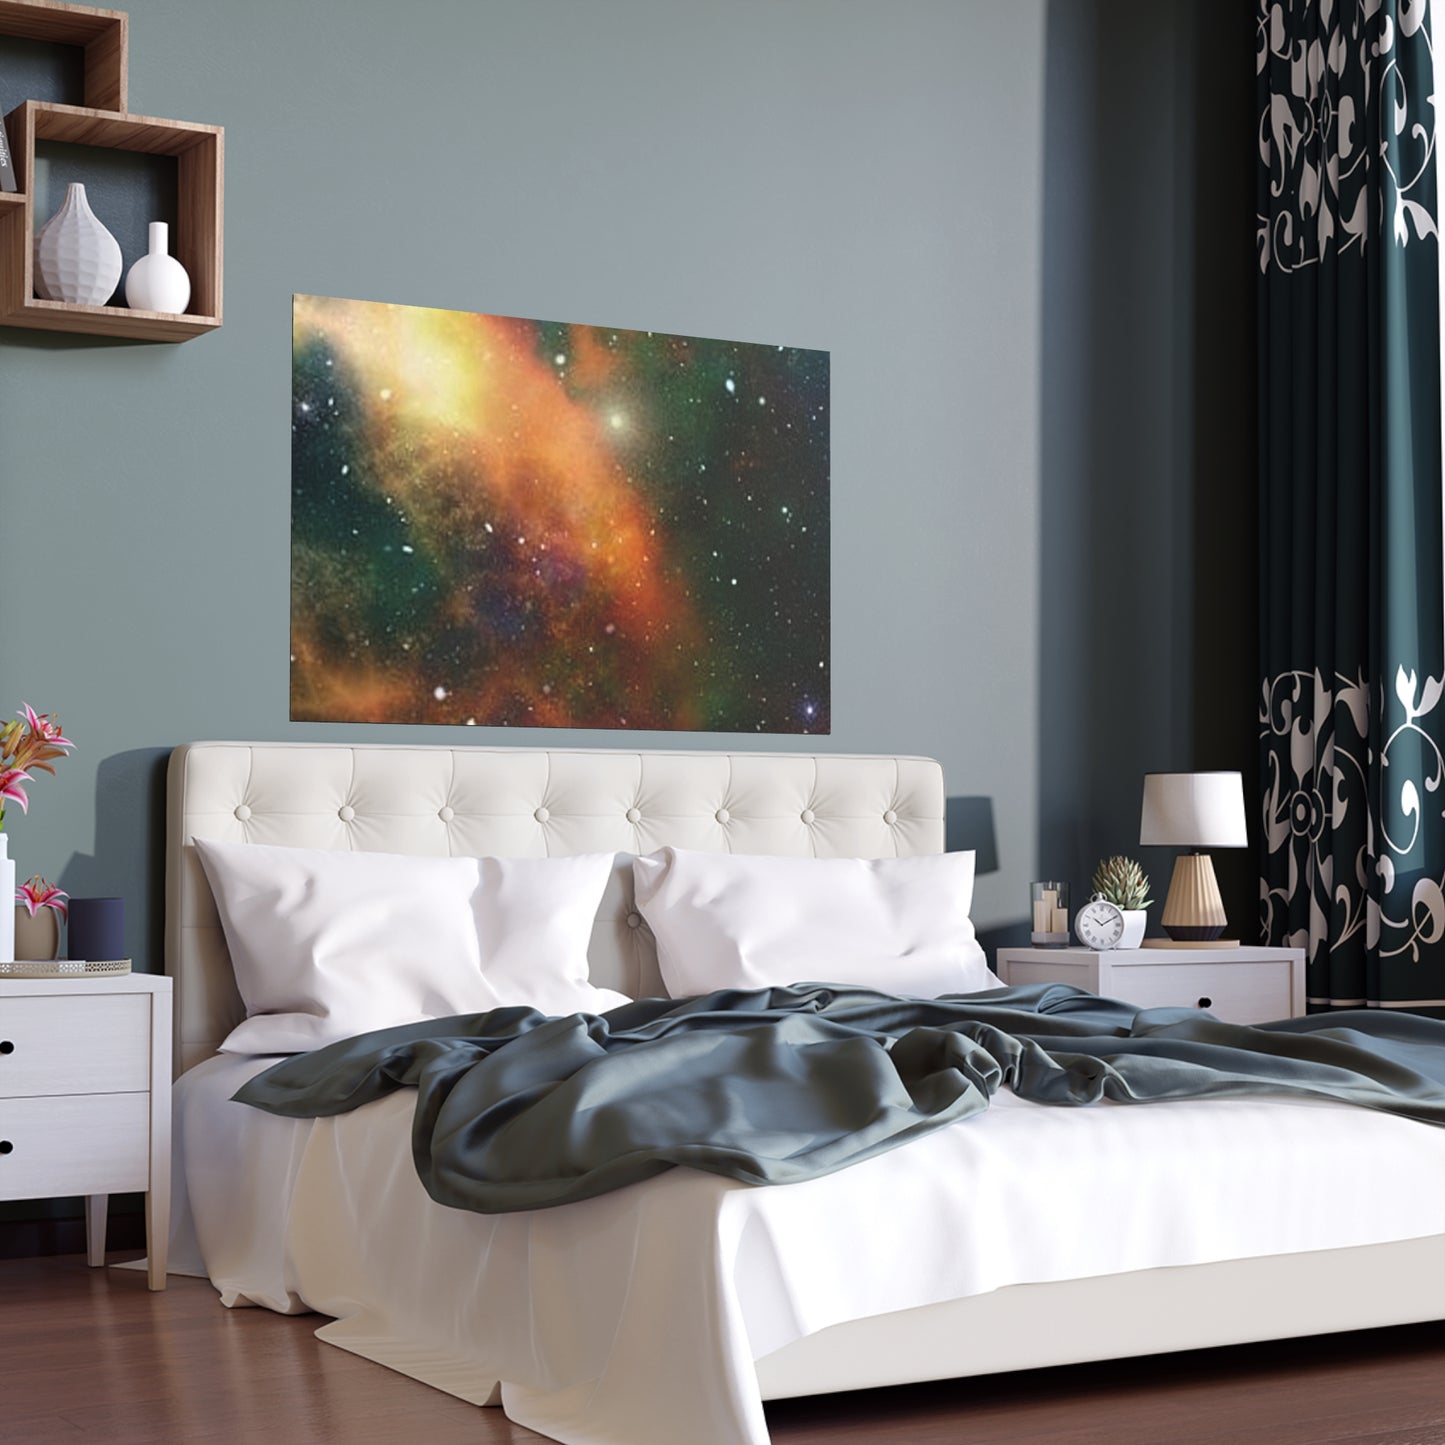 SPACE WALL ART